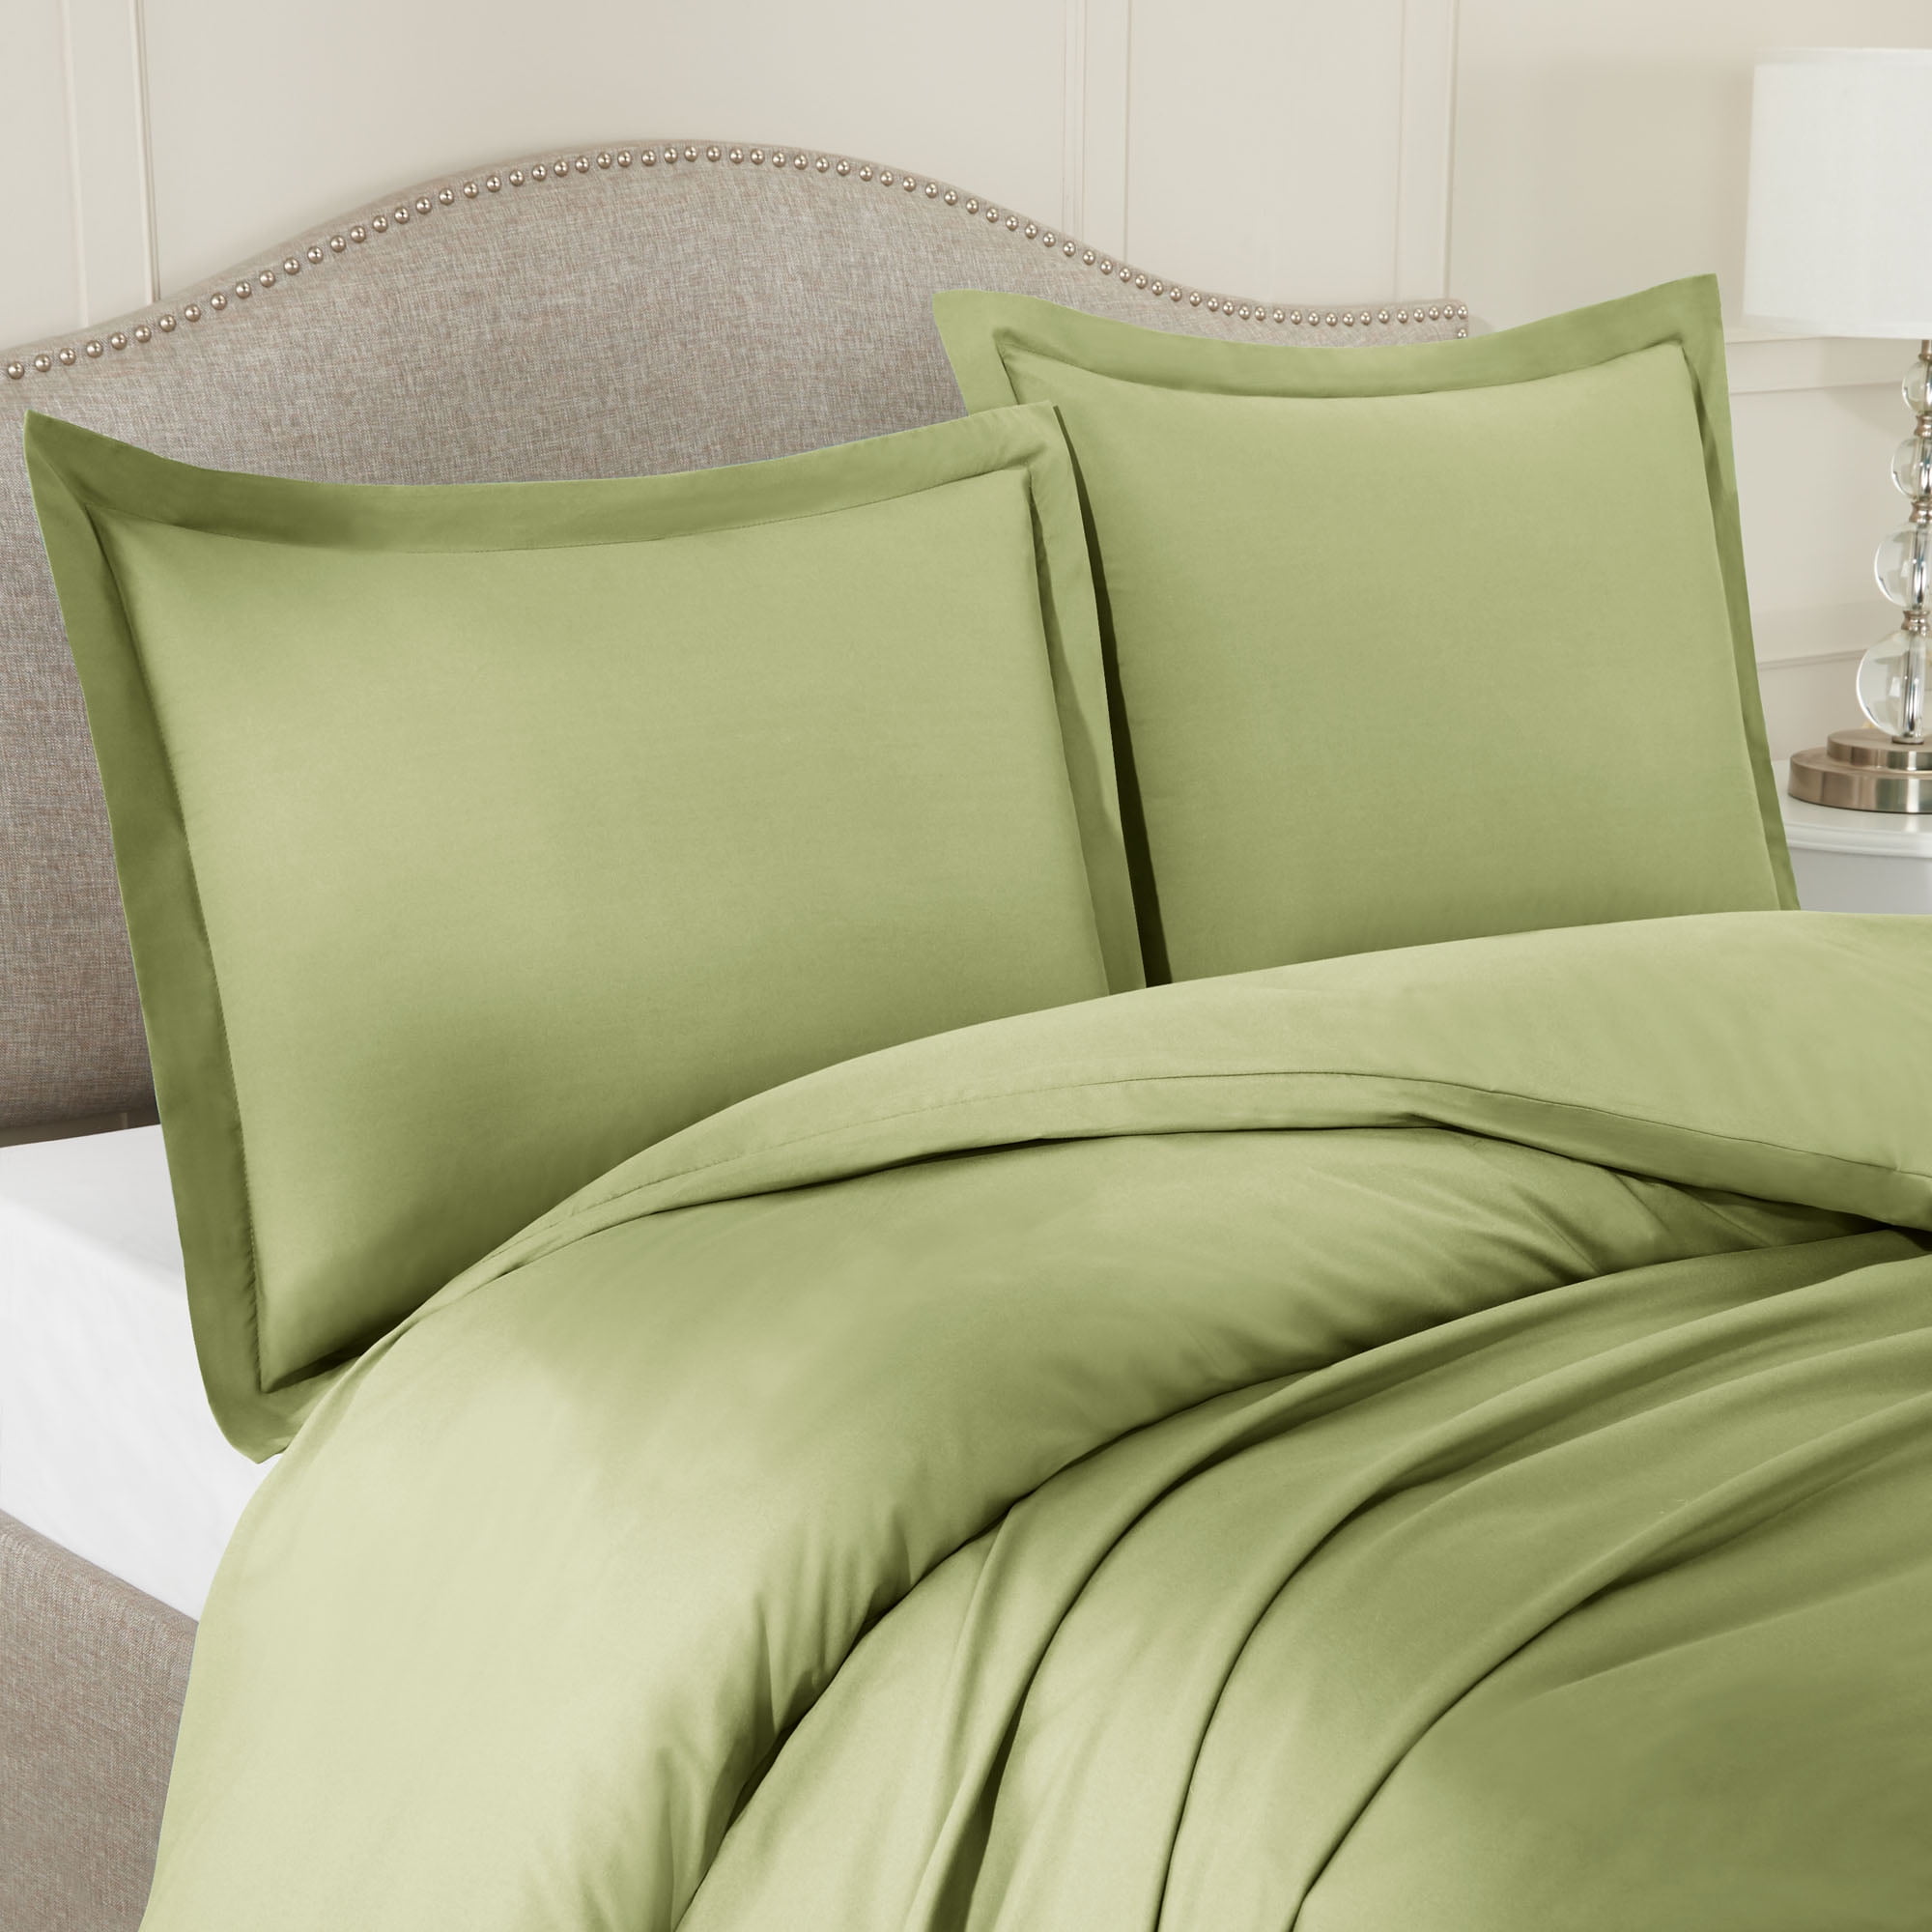 King Size 3 Piece Duvet Cover Set With, Green King Size Duvet Cover